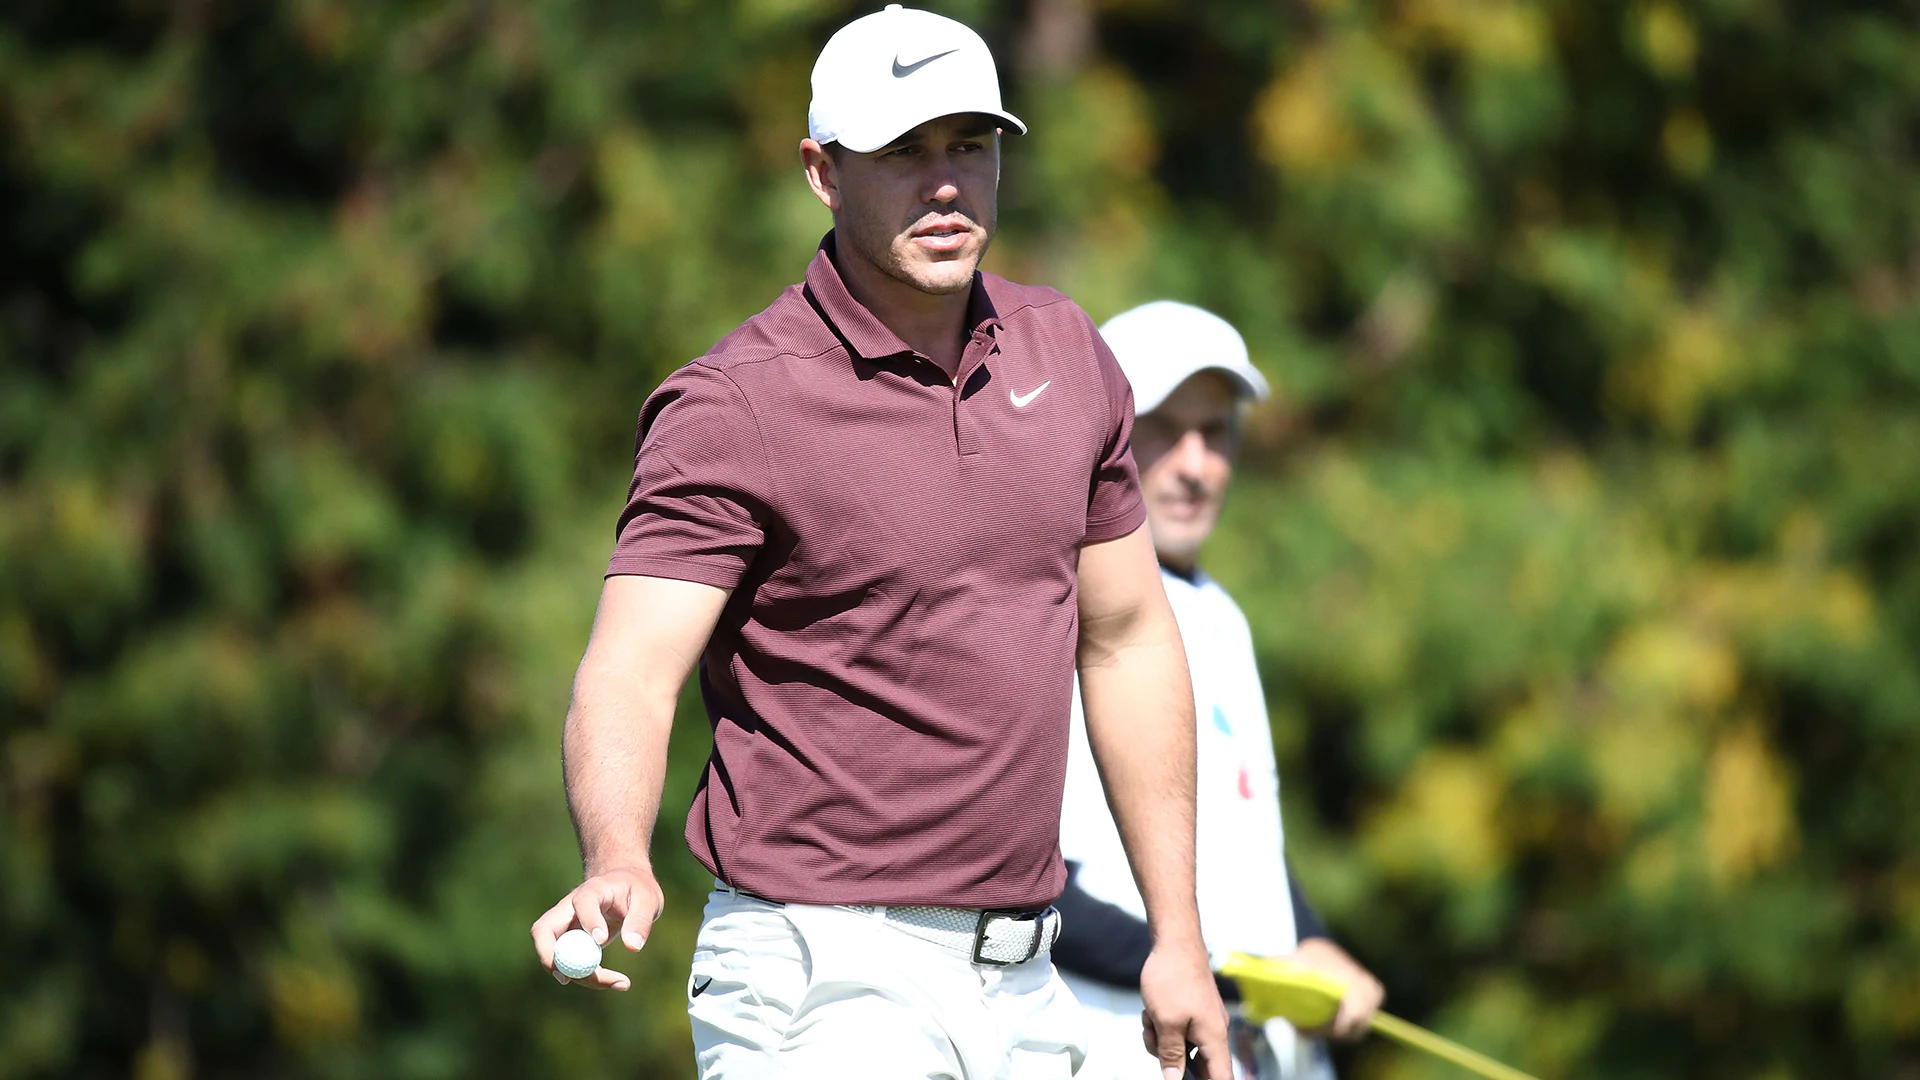 Koepka ahead by four, with No. 1 ranking in his grasp